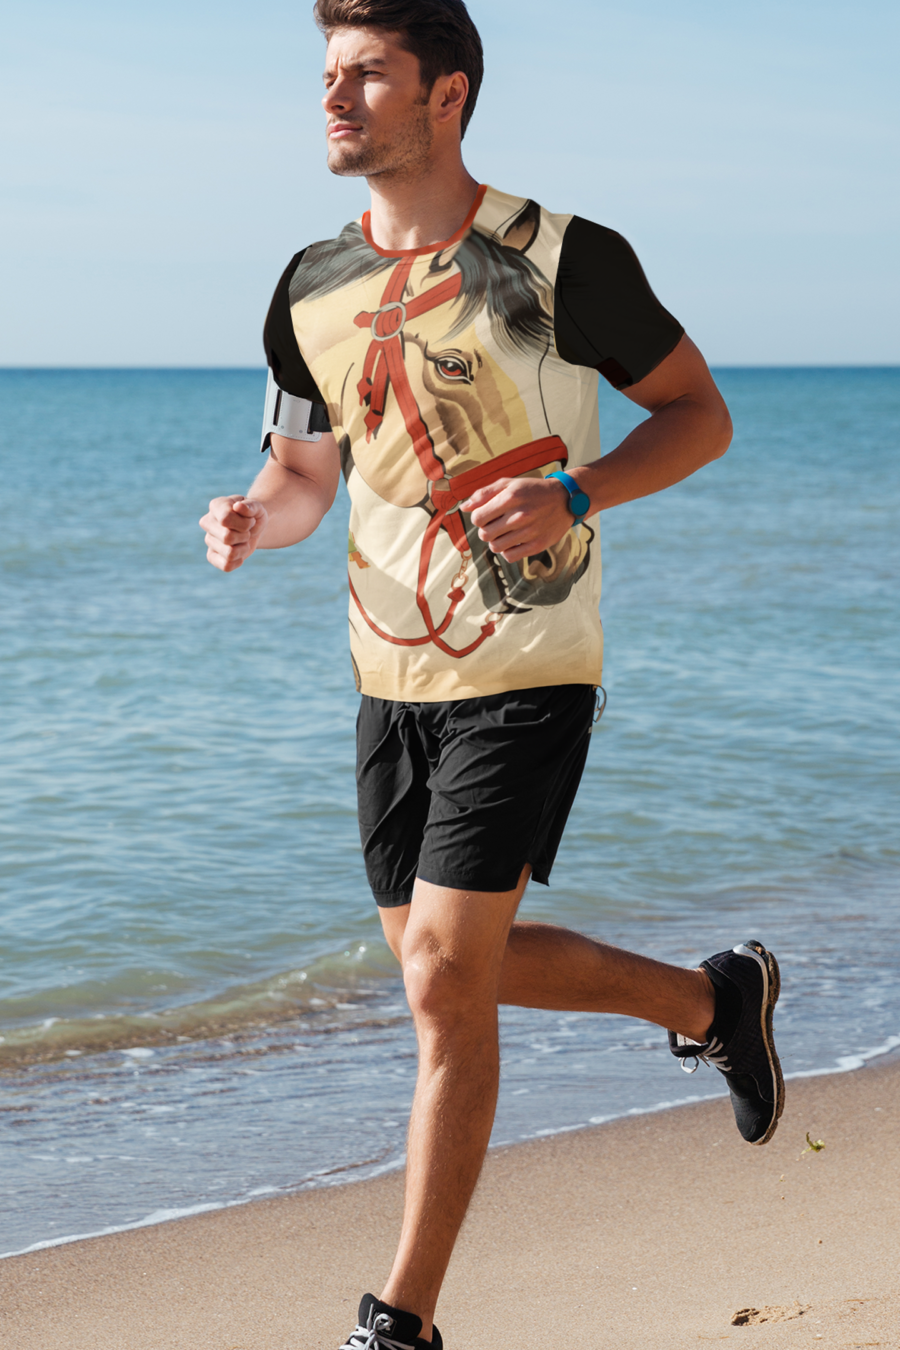 Man running on the beach wearing a jersey with an all over print of chinese horse art with black sleeves and red collar.